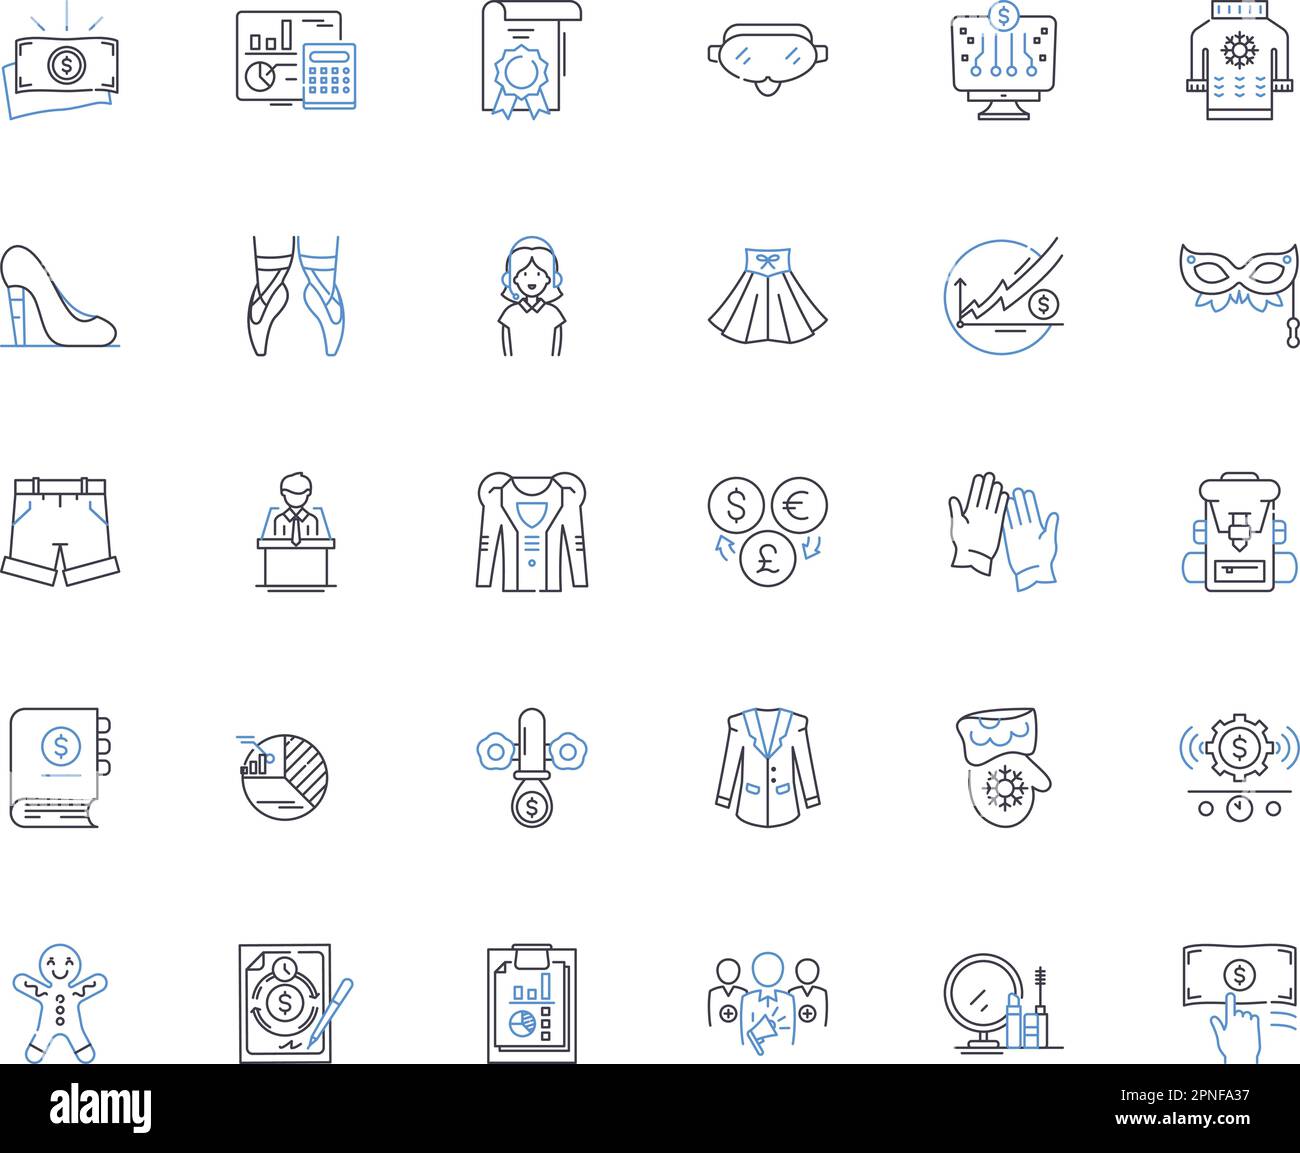 Movie theater line icons collection. Screen, Matinee, Ticket, Recliner, Projection, Premiere, Popcorn vector and linear illustration. Snack,Soundtrack Stock Vector